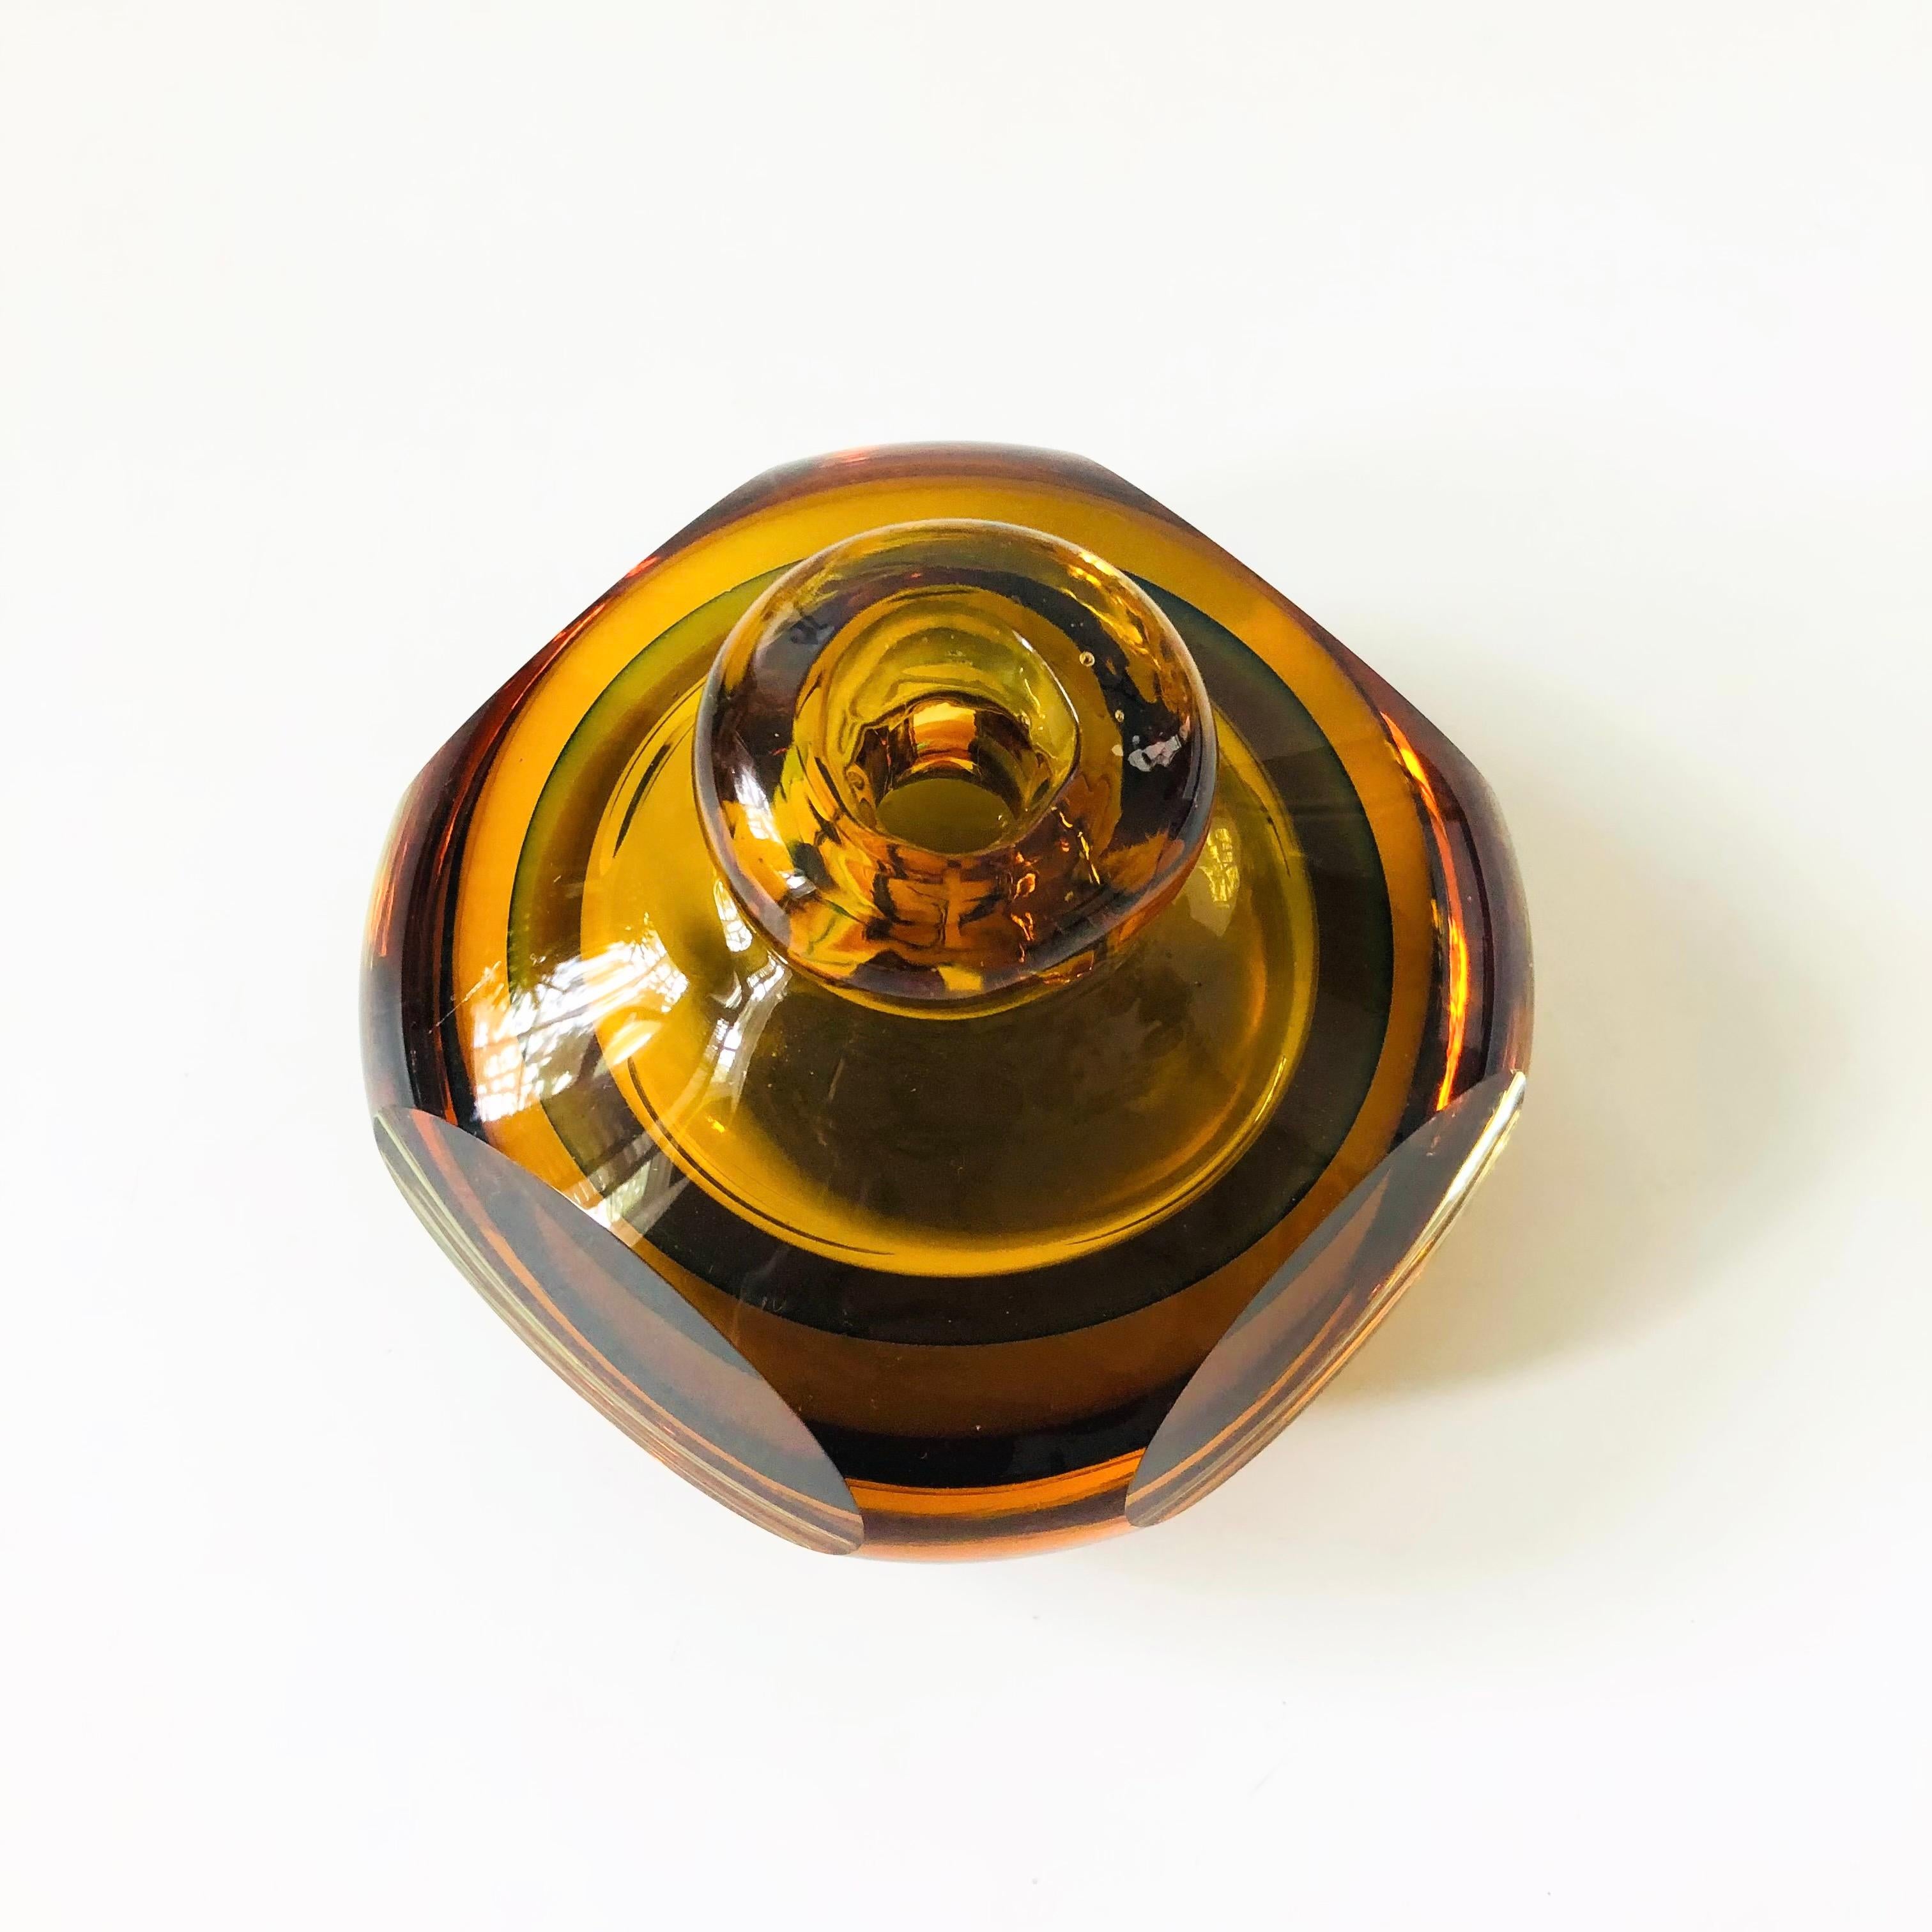 A vintage art glass bud vase. Made of thick heavy glass in a beautiful amber color.

